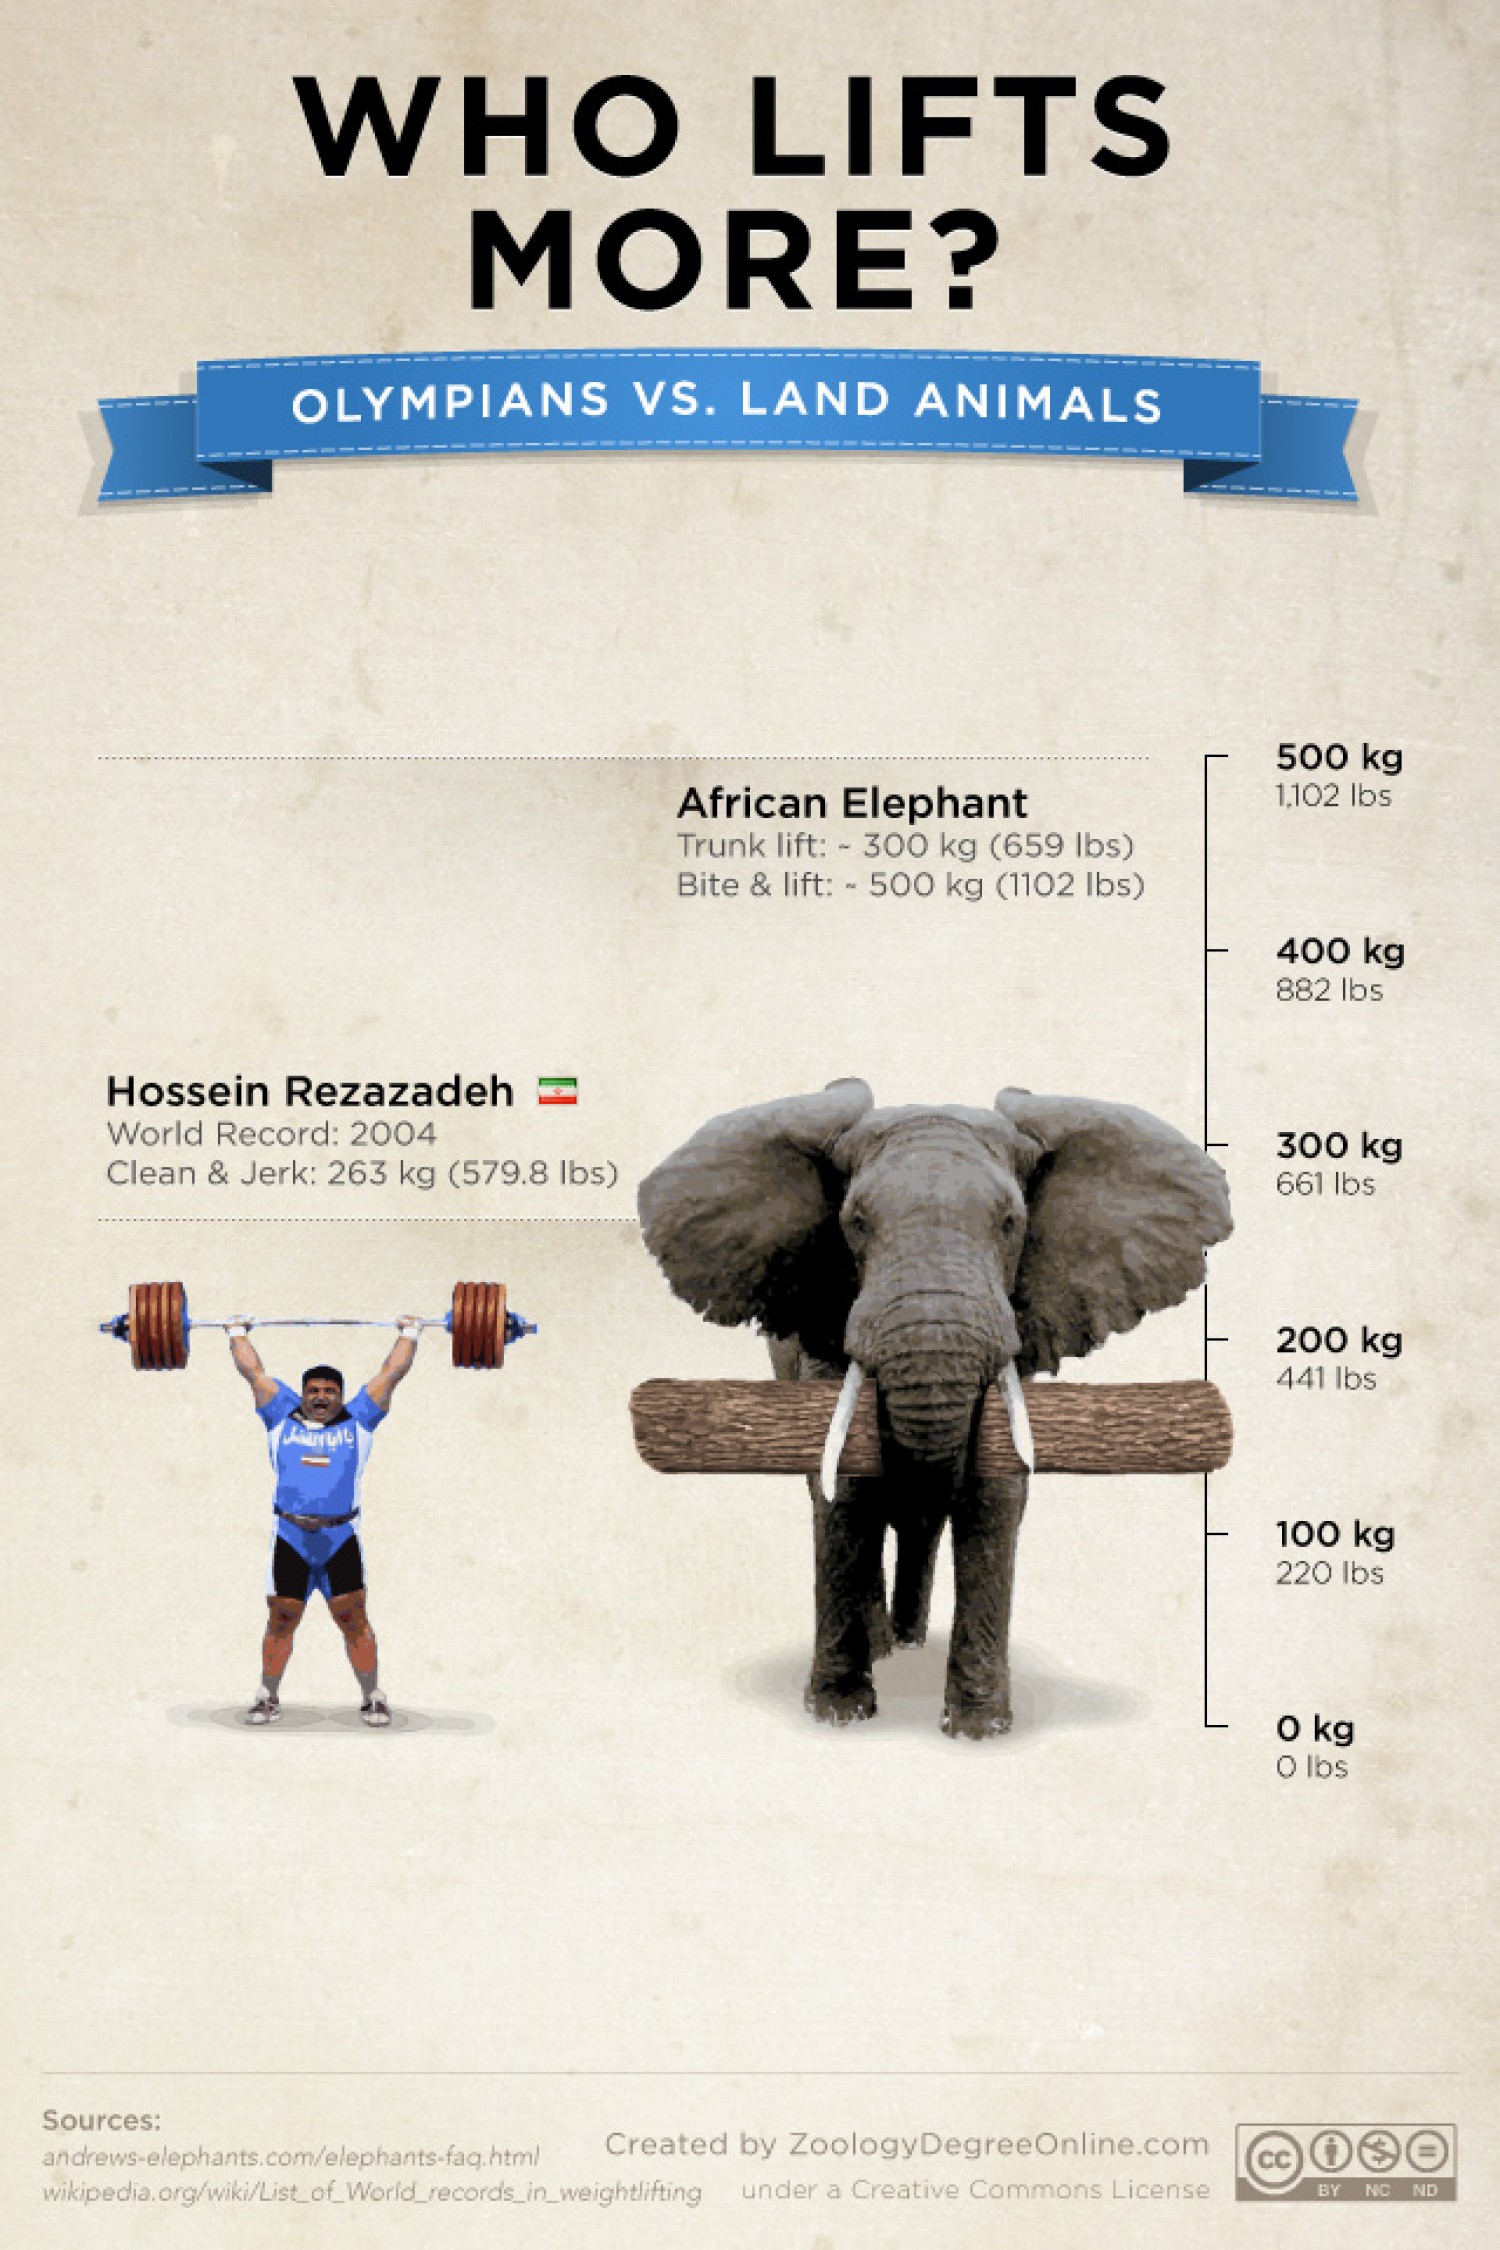 animals-vs-olympians--who-lifts-more_502bfeb82cd6b_w1500